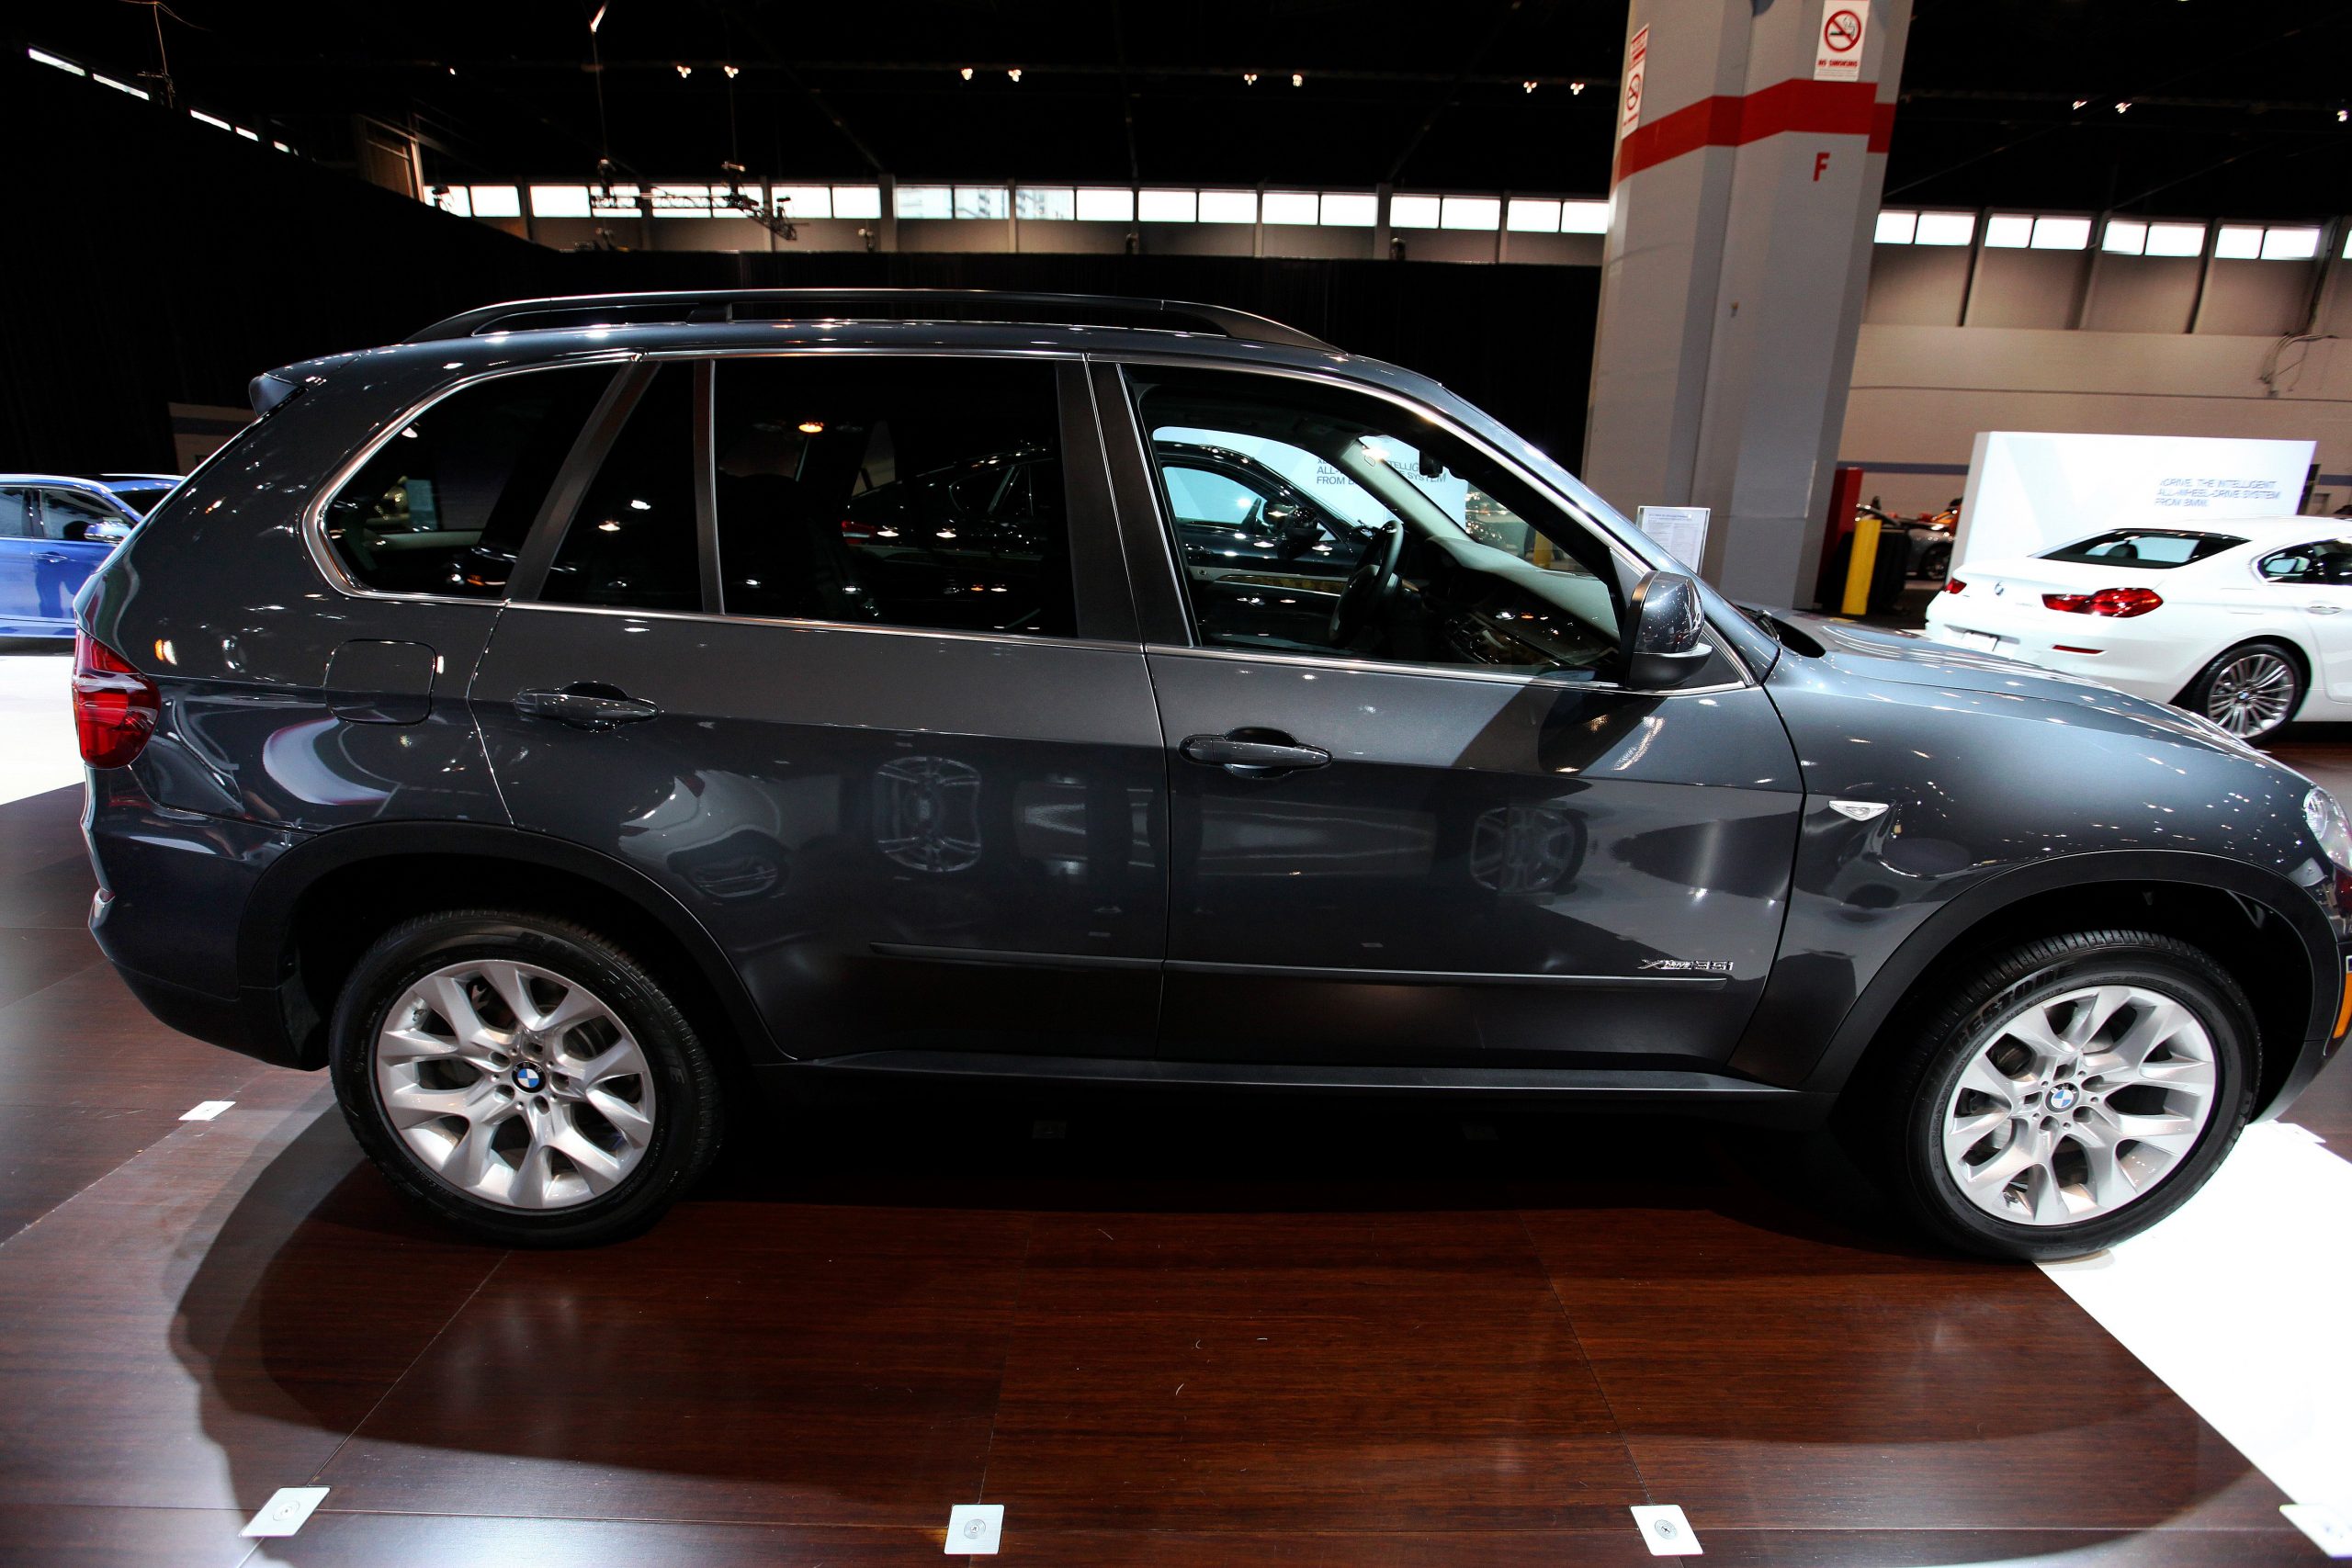 A black 2014 BMW X5 on display at an auto show